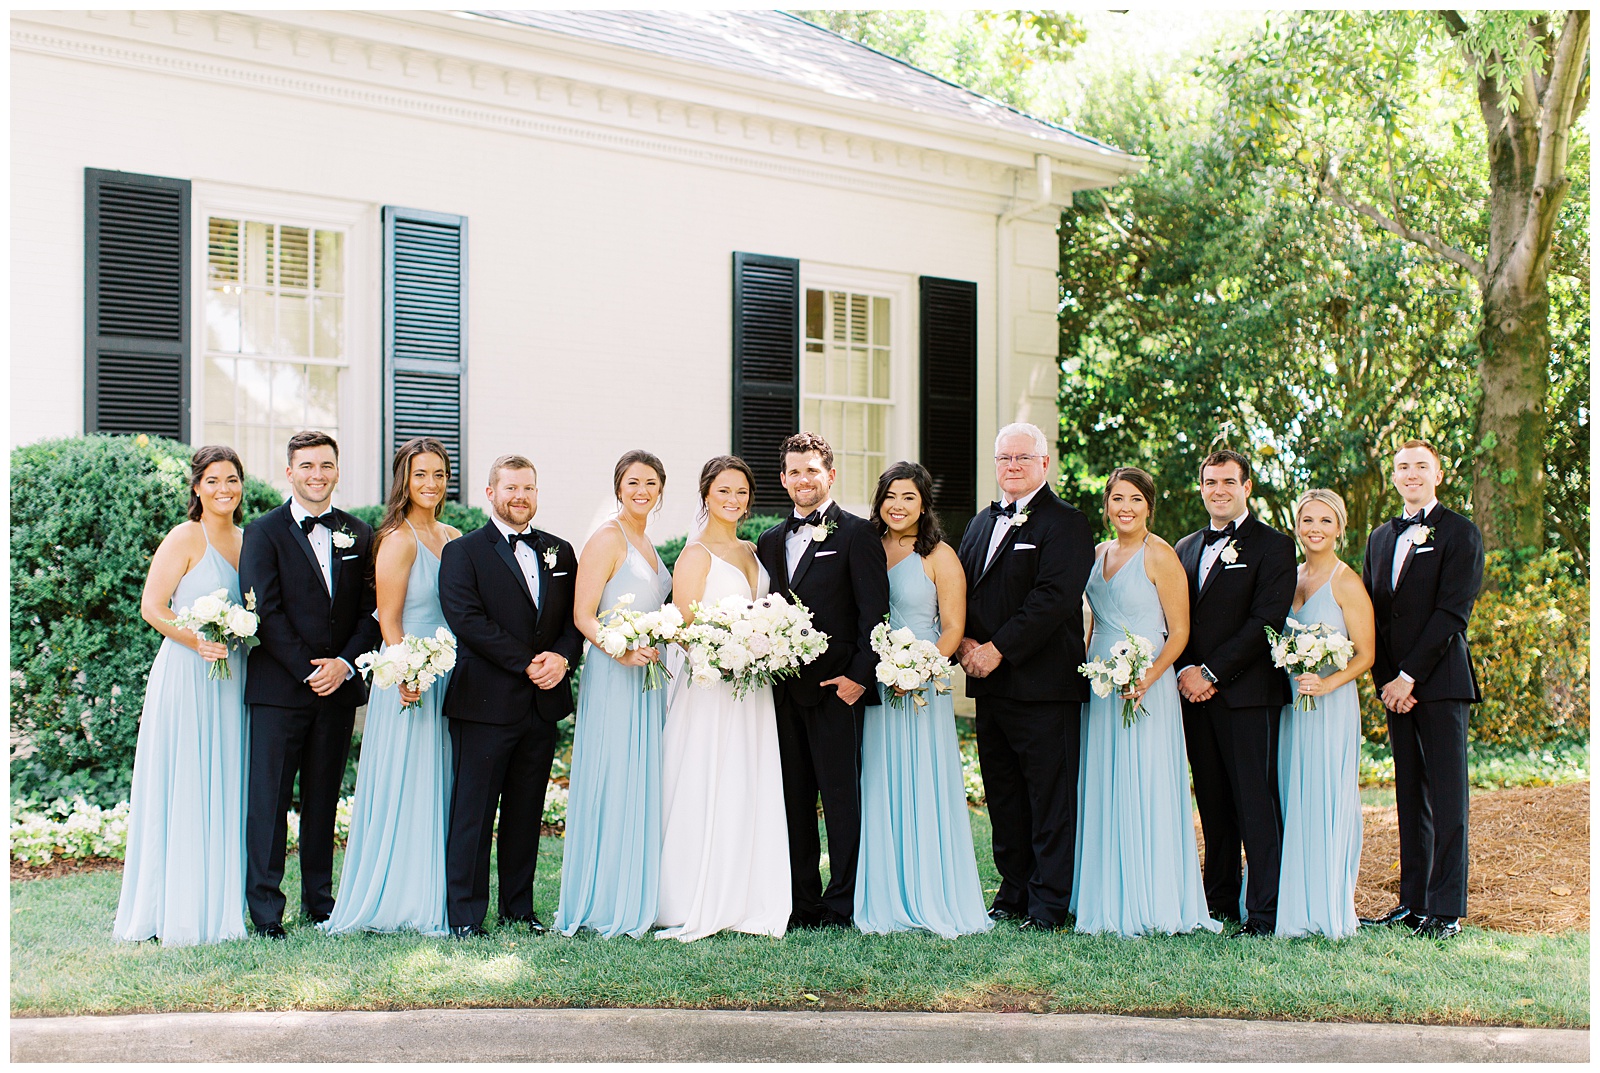 bride and groom pose with bridal party in black tuxes and blue dresses